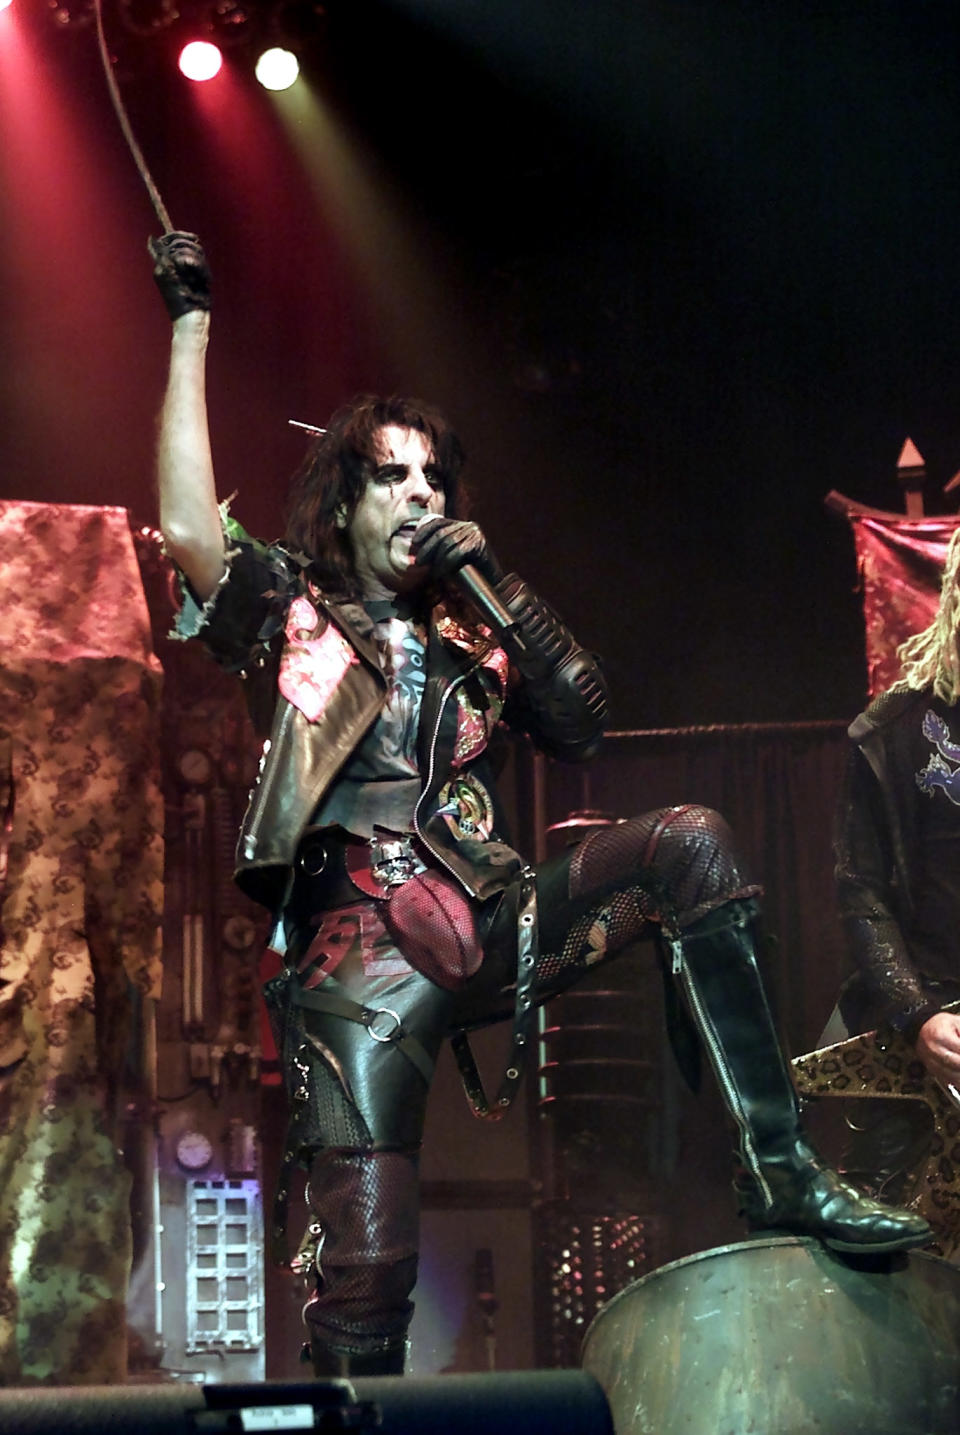 Alice Cooper kicks off his "Brutal Planet Descent Into Dragontown" tour
at the Aladdin Theatre for the Performing Arts in Las Vegas, September
29, 2001. Cooper will release the new album "Dragontown" on October 9.
REUTERS/Ethan Miller

EM/HB